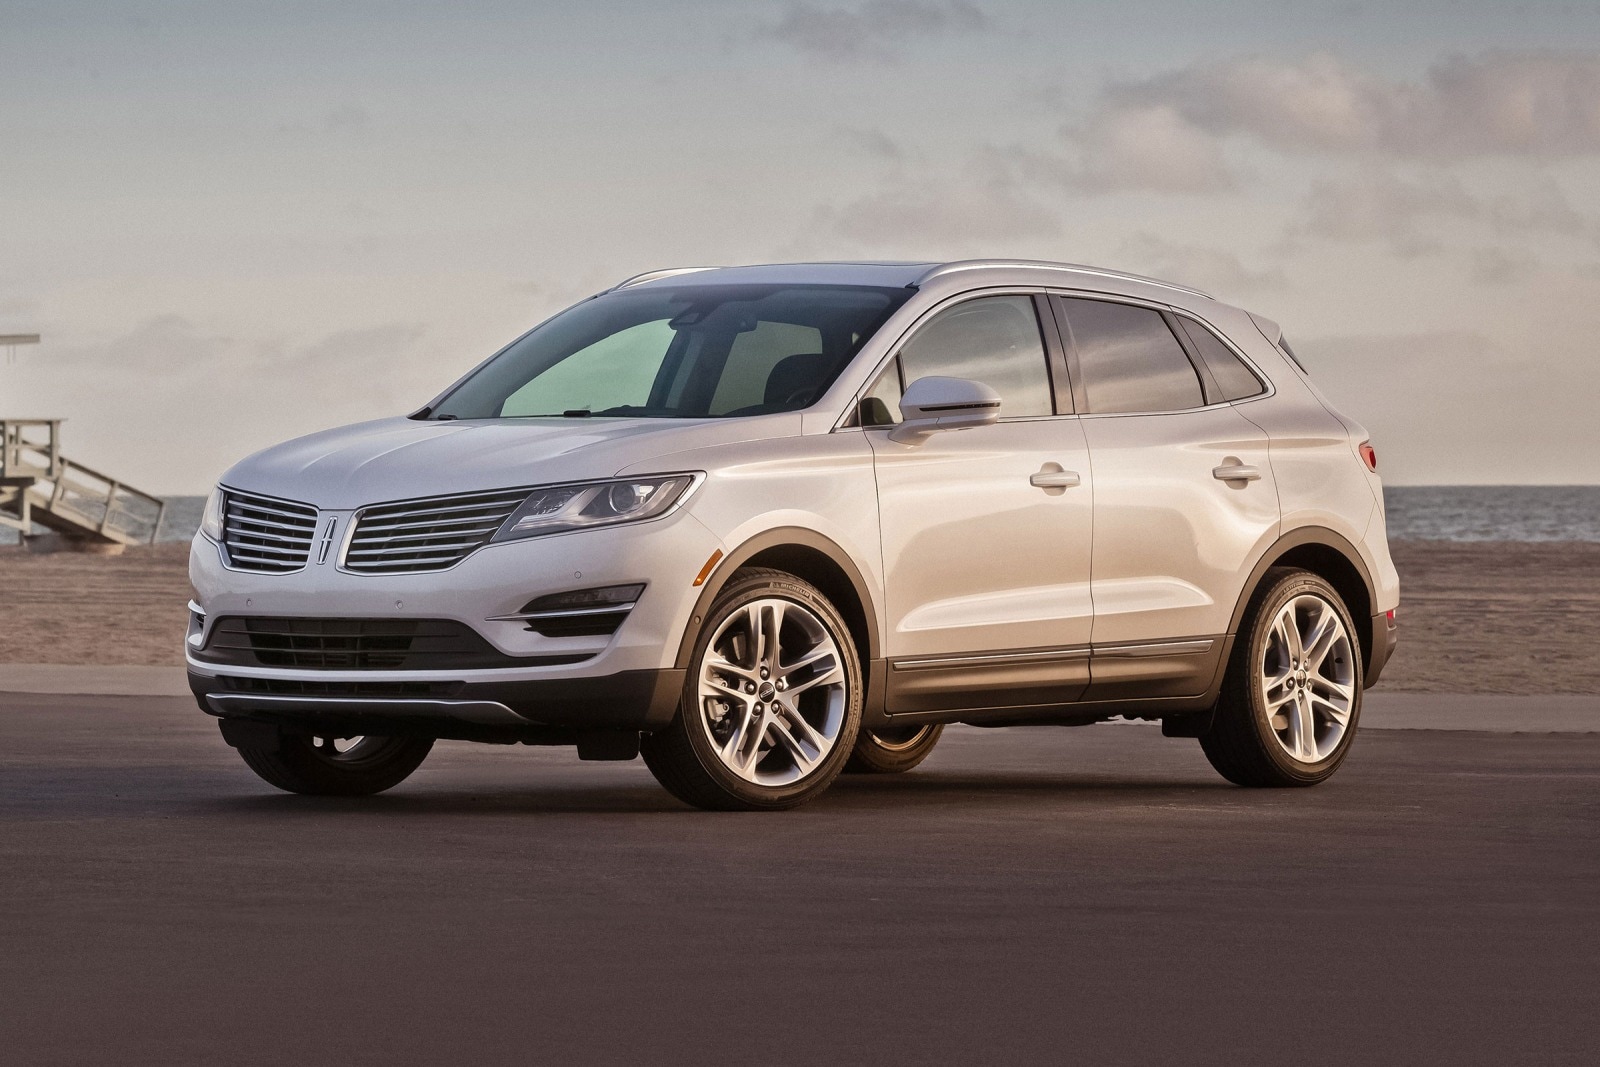 2018 Lincoln MKC Review & Ratings | Edmunds